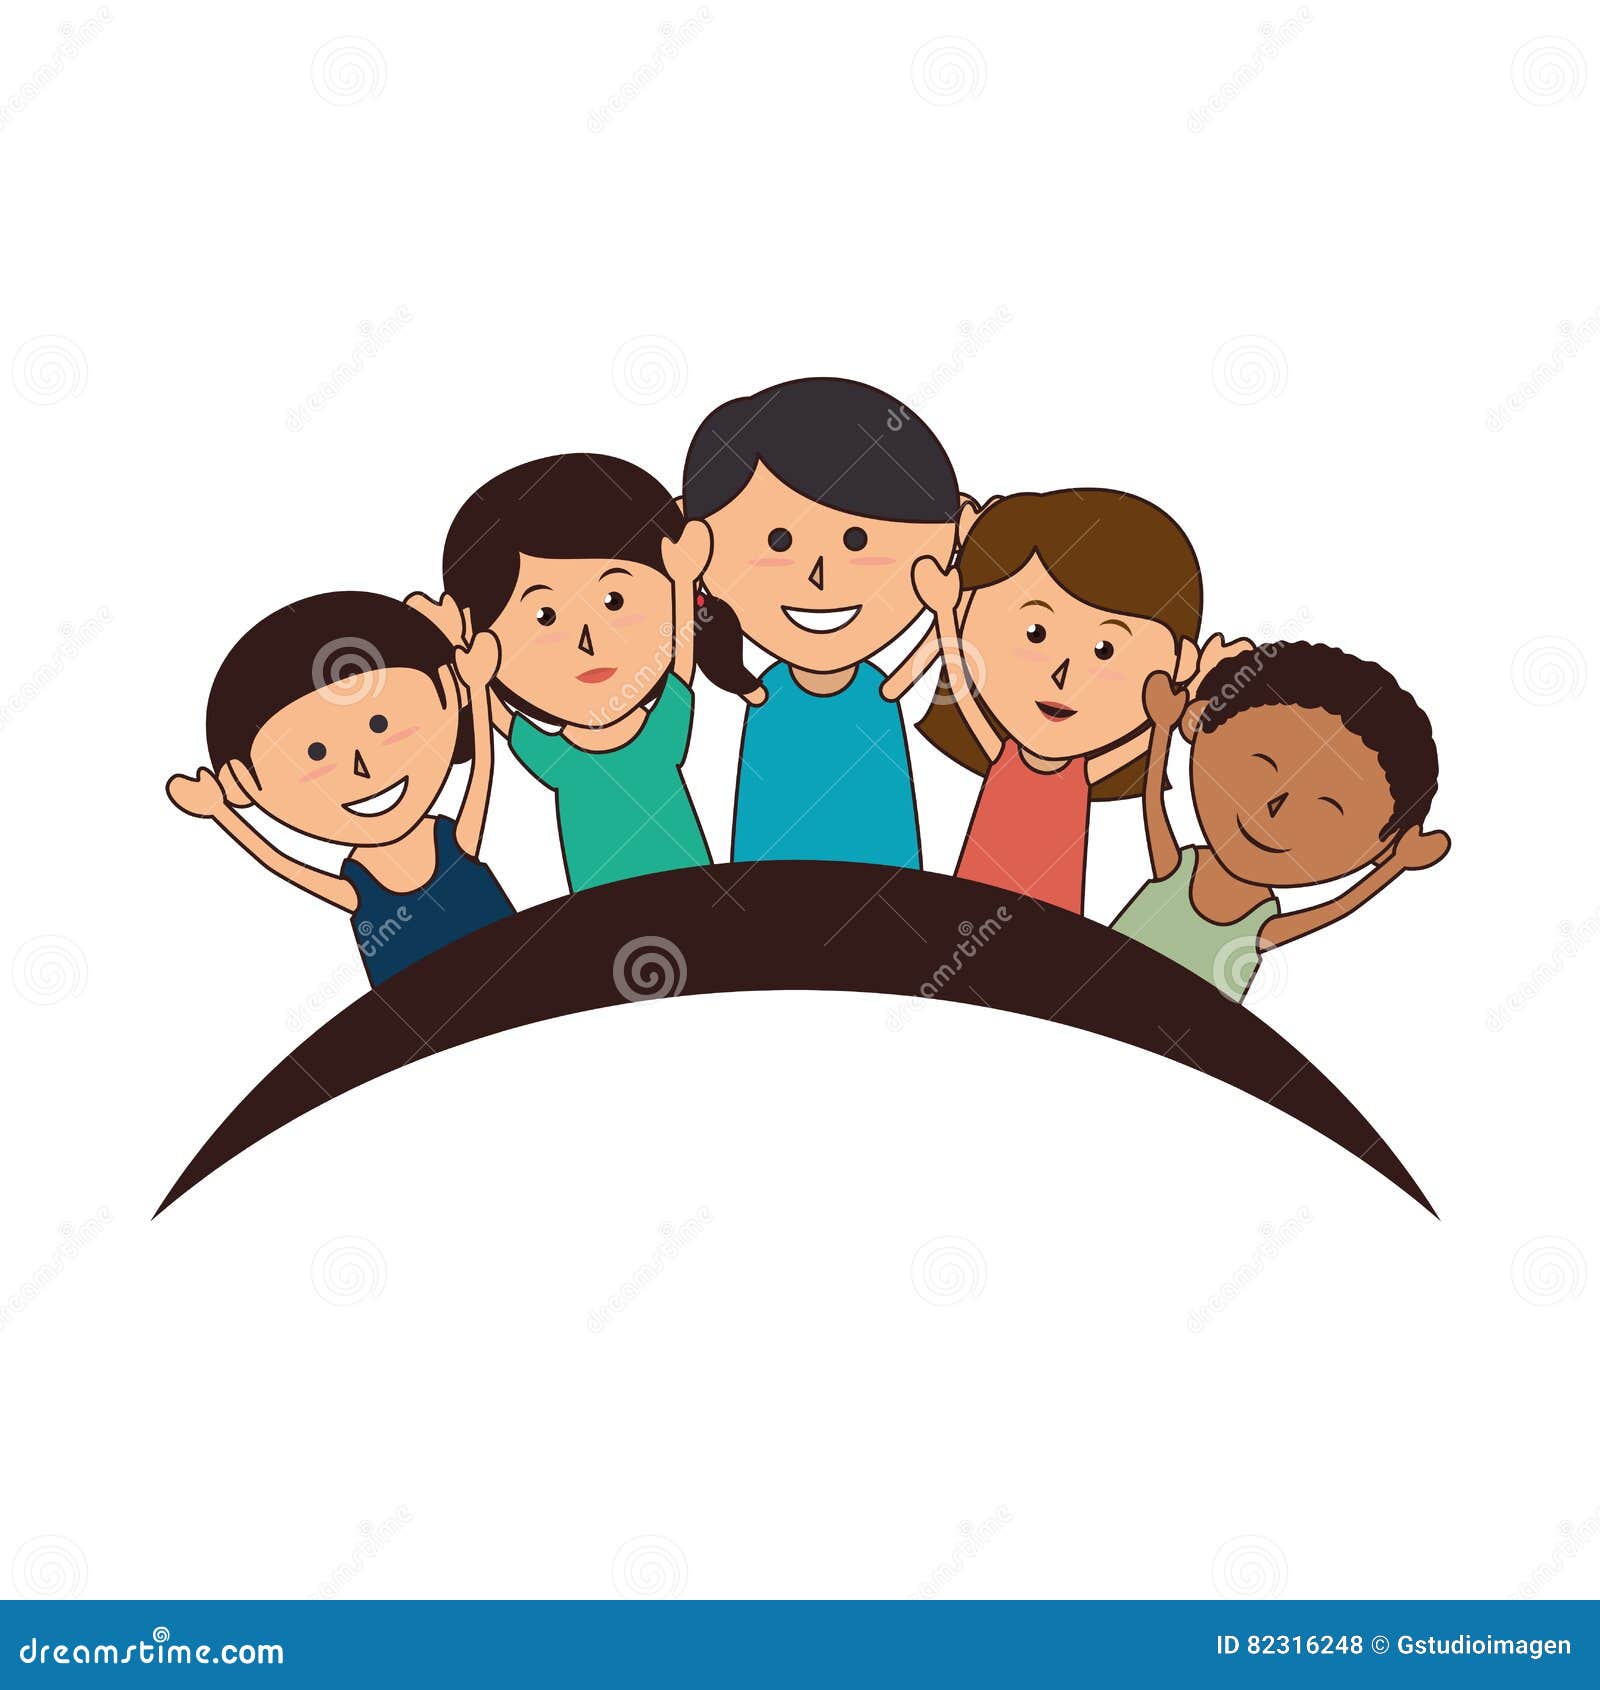 Cute kids group icon stock illustration. Illustration of faces ...